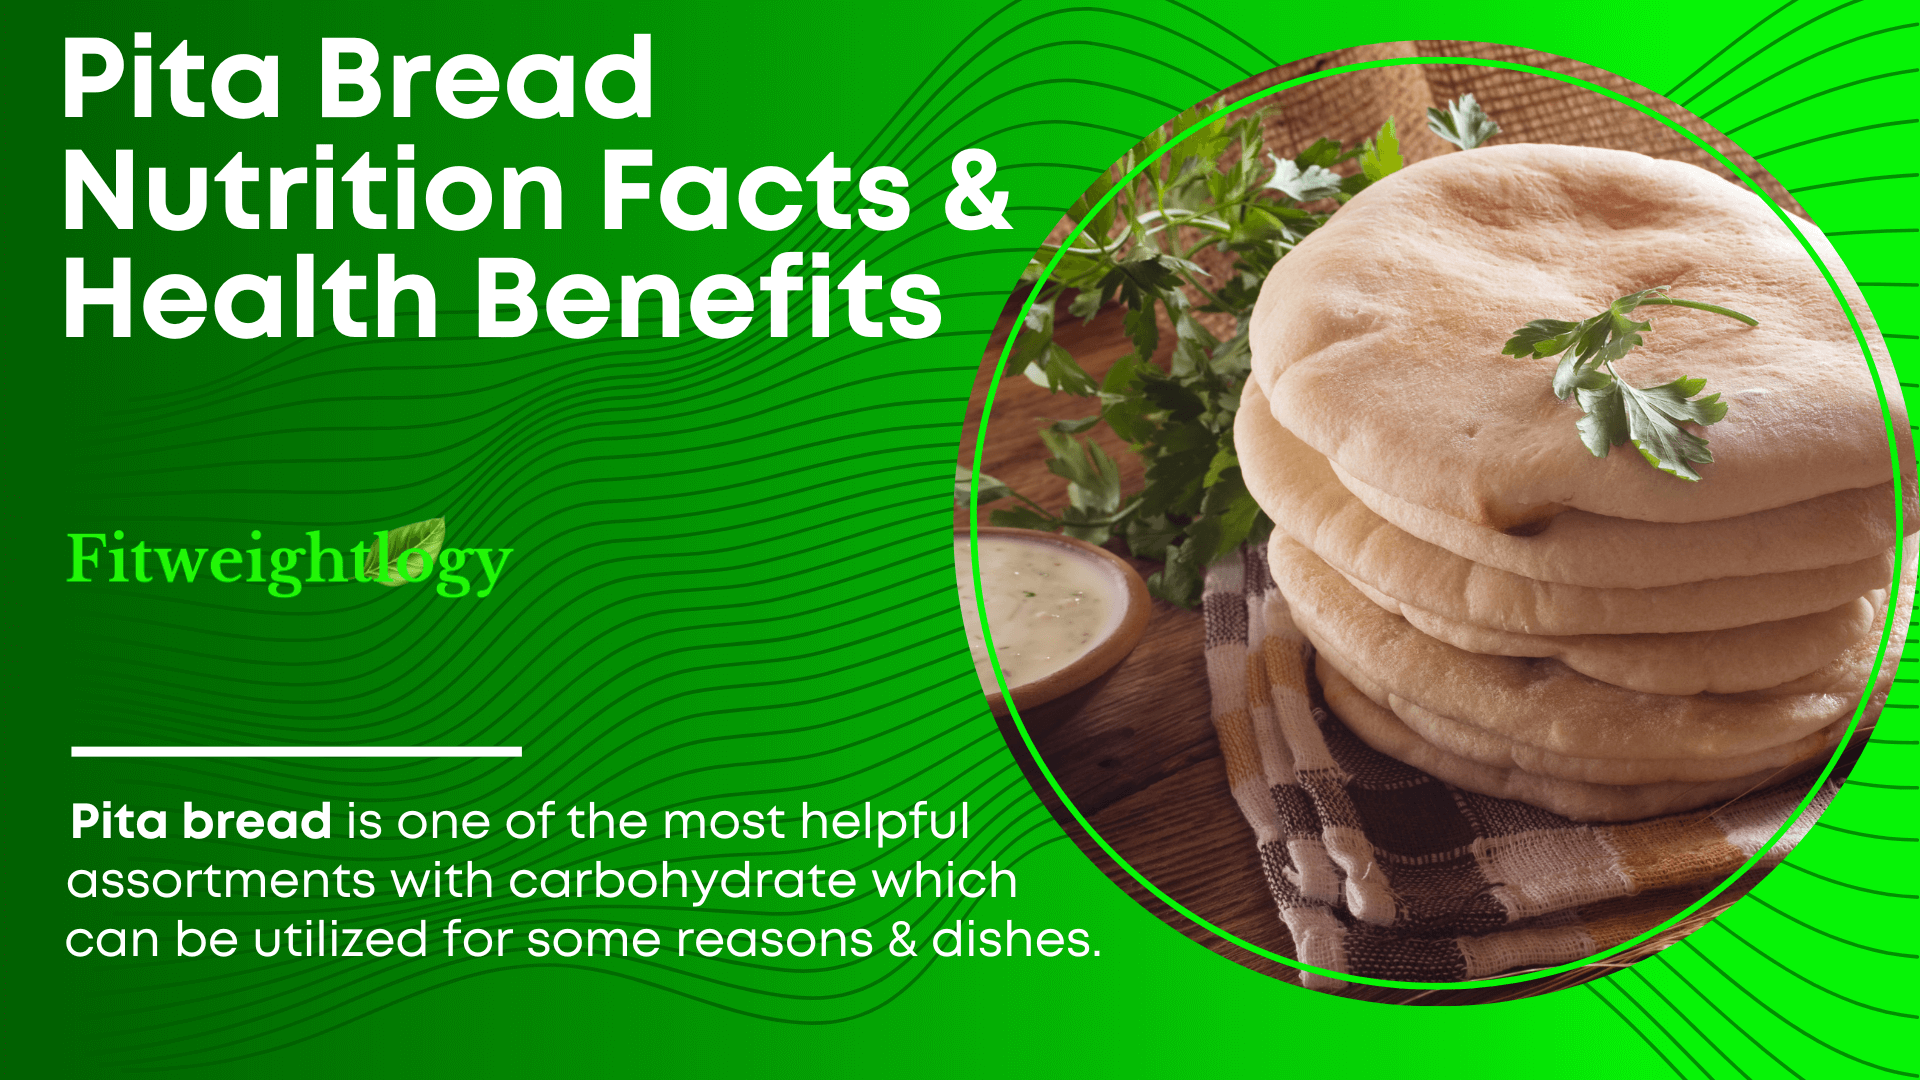 Pita Bread Nutrition Facts and Health Benefits – Compliance Of Nutrition Claims